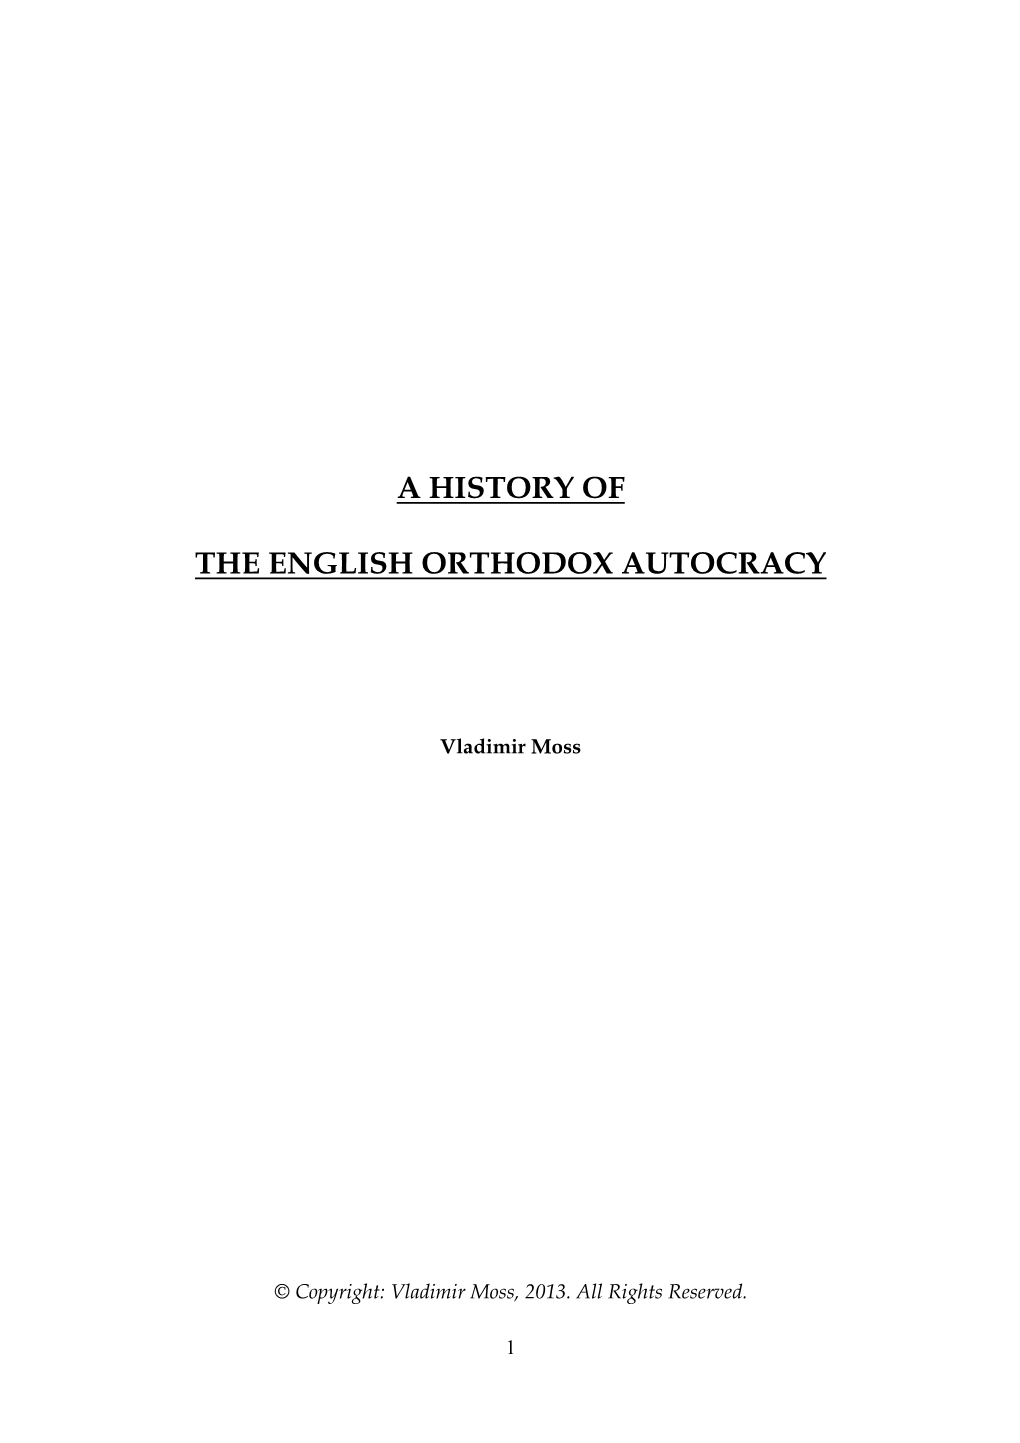 A History of the English Orthodox